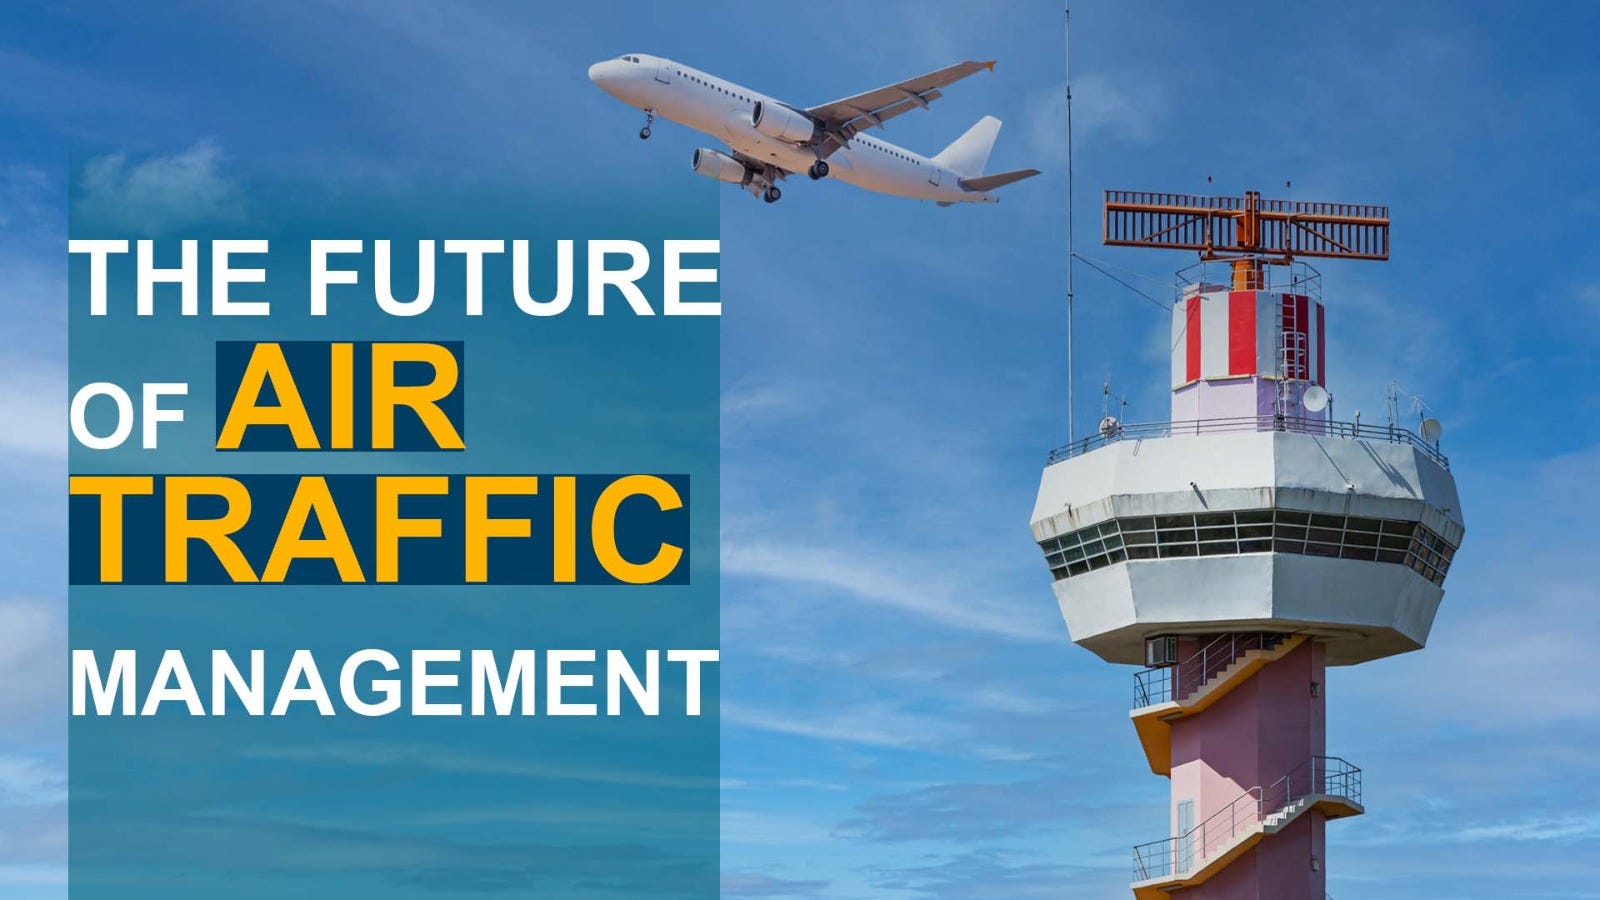 The Future of Air Traffic Management